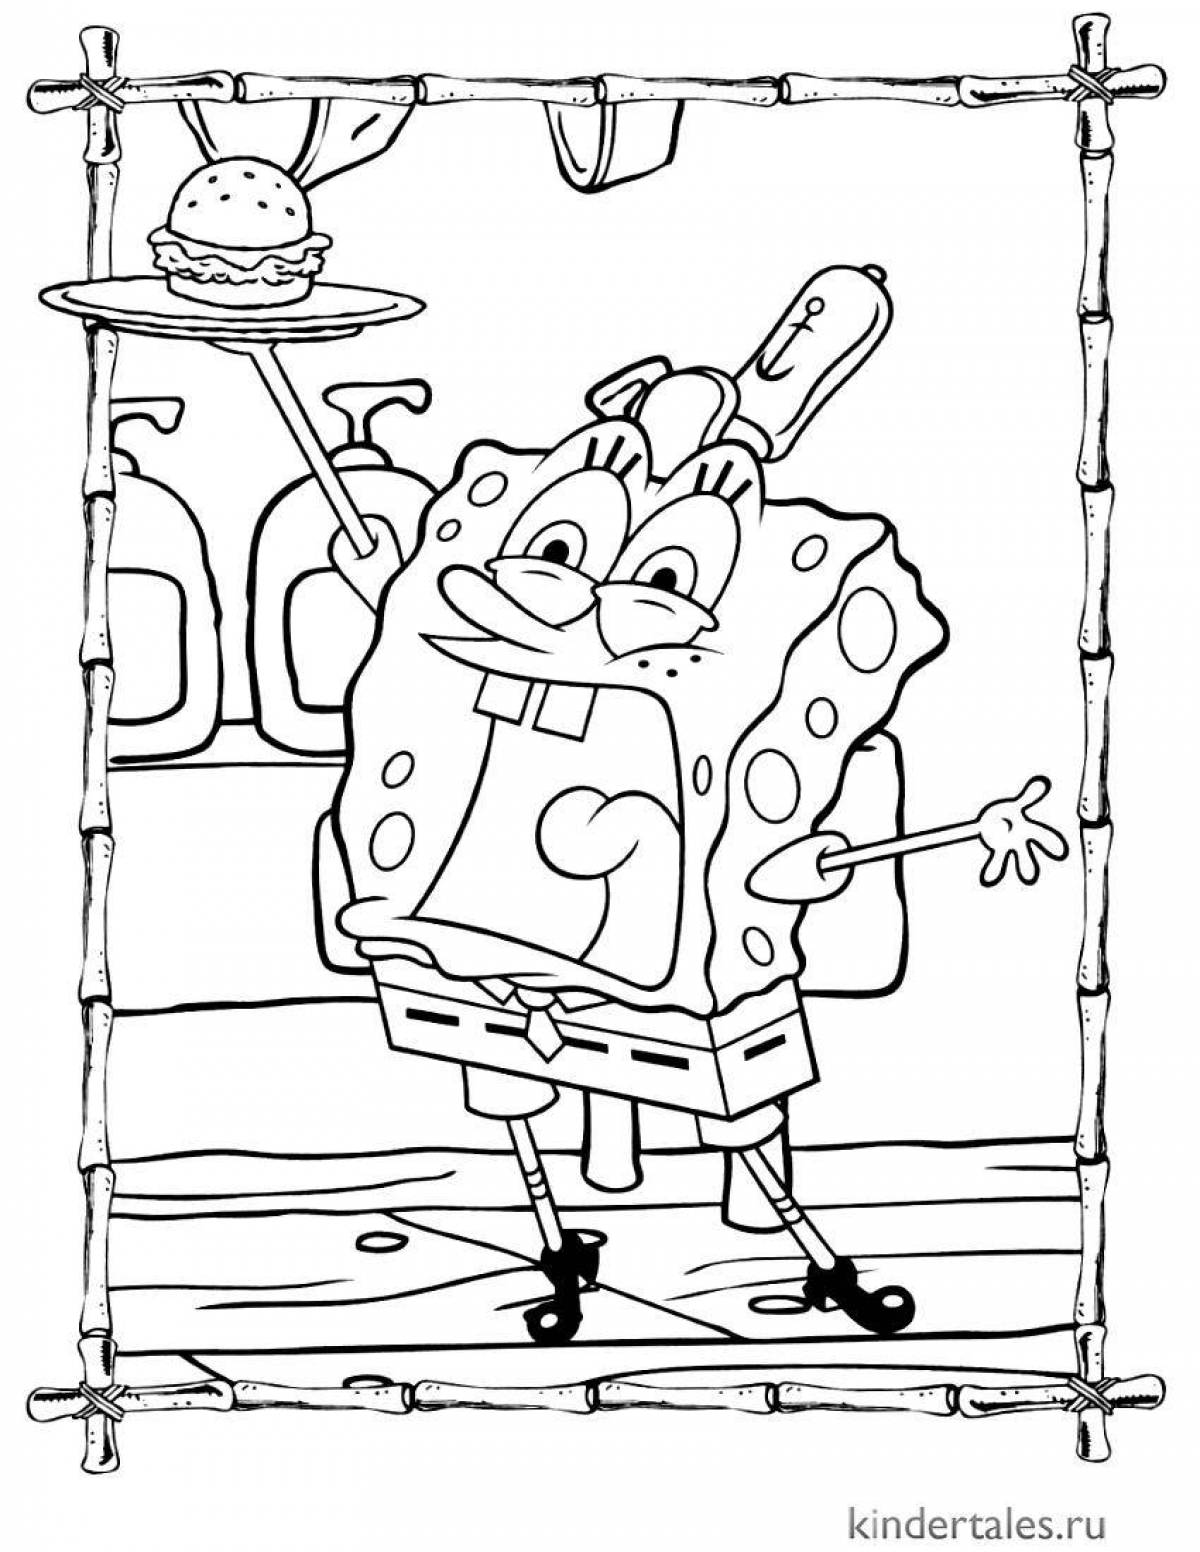 Exciting krusty crab coloring page